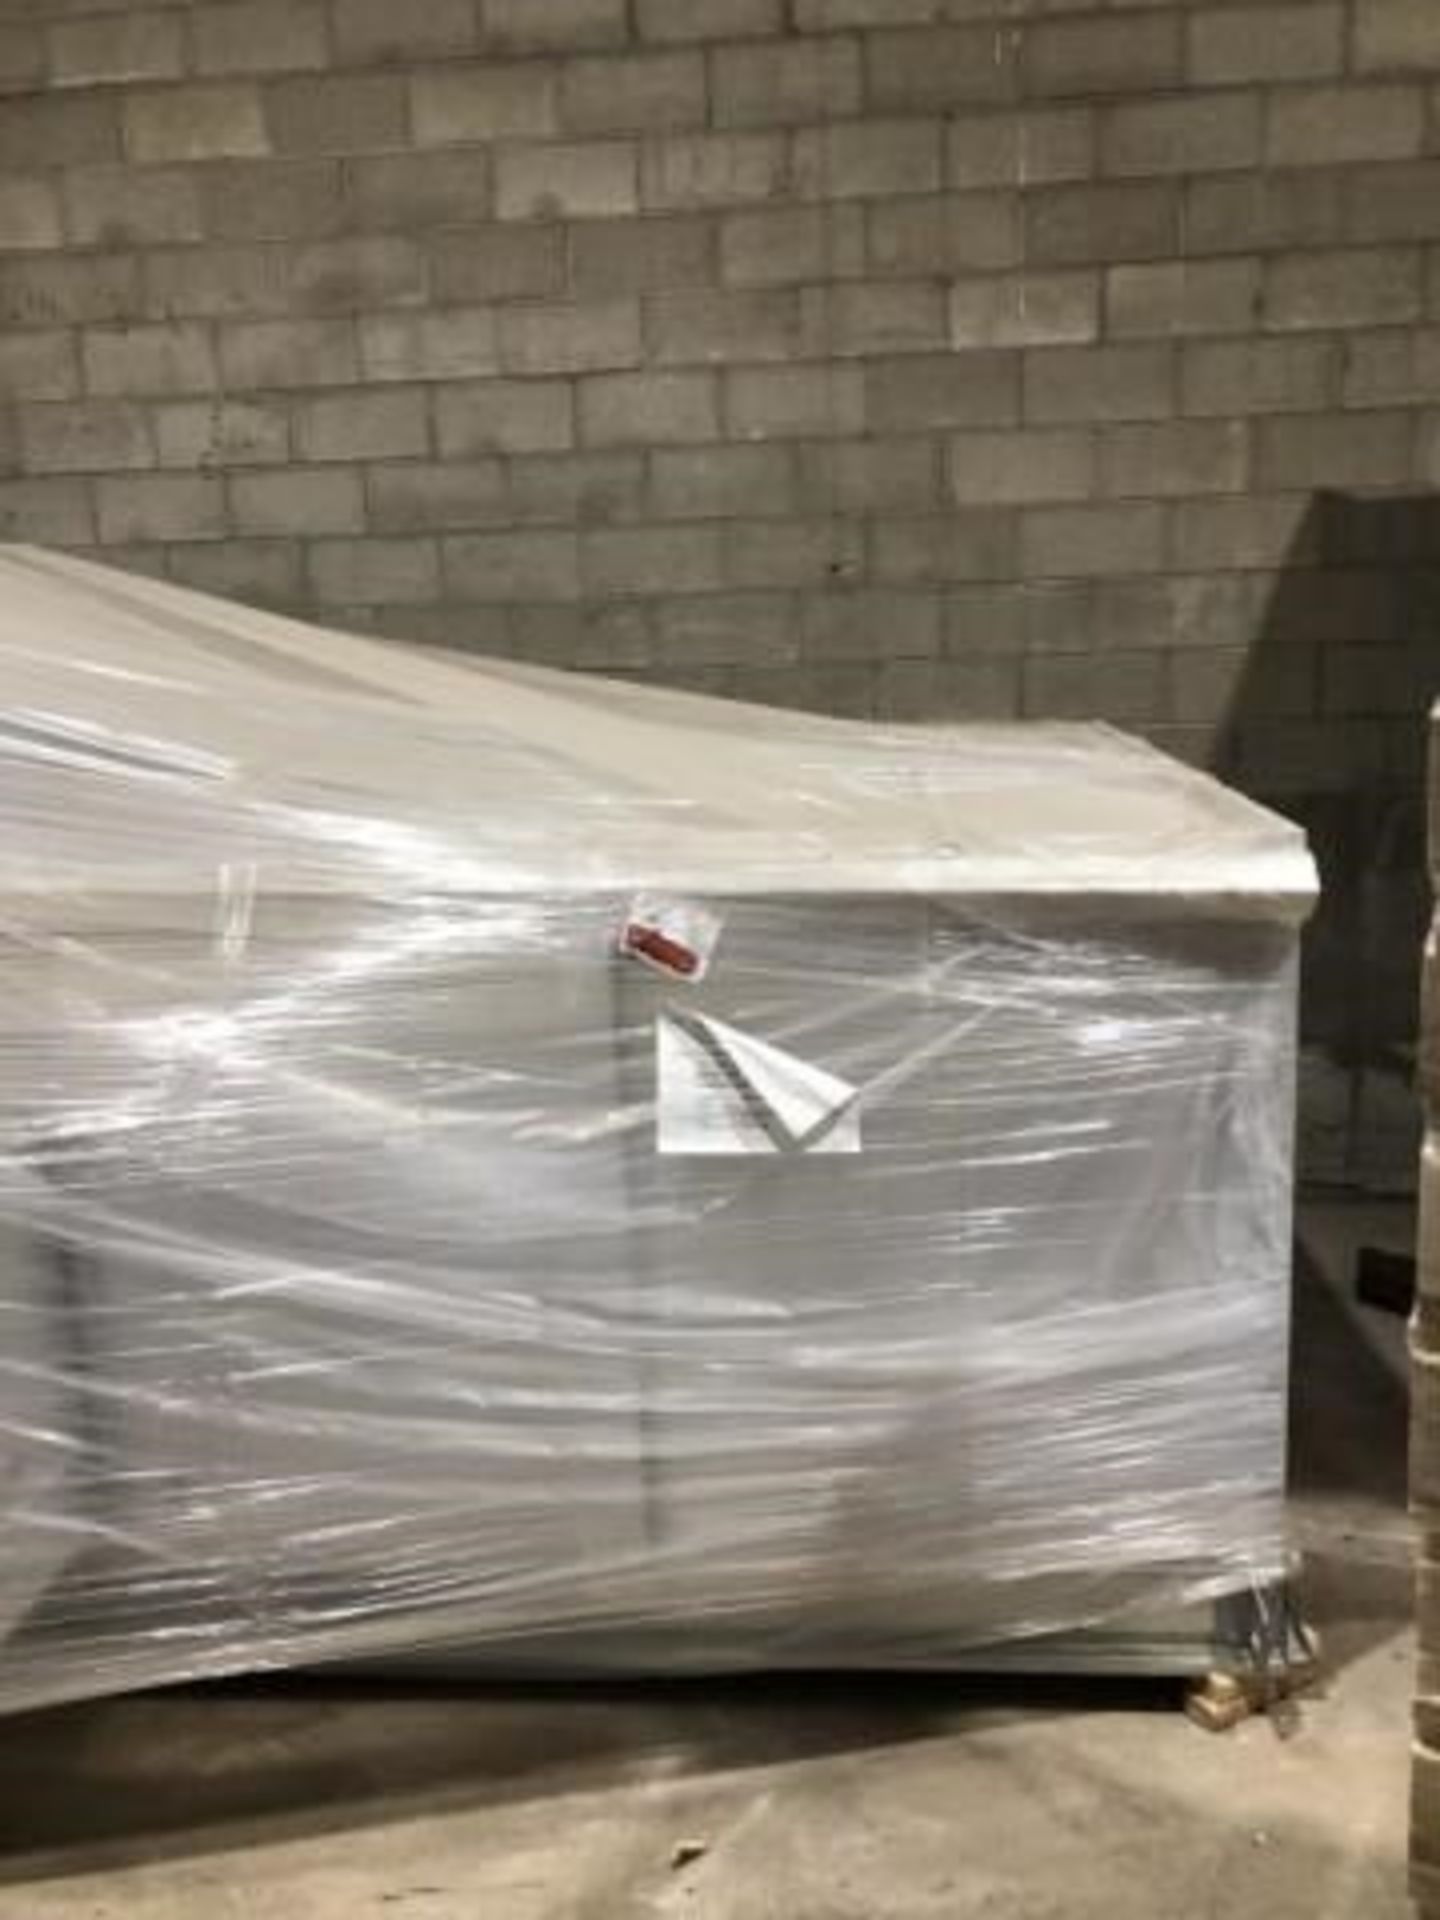 Agronomic IQ 12 Ton Outdoor Dehumidifier - Unused & Wrapped on OEM Skid - Air Handler - Image 2 of 3